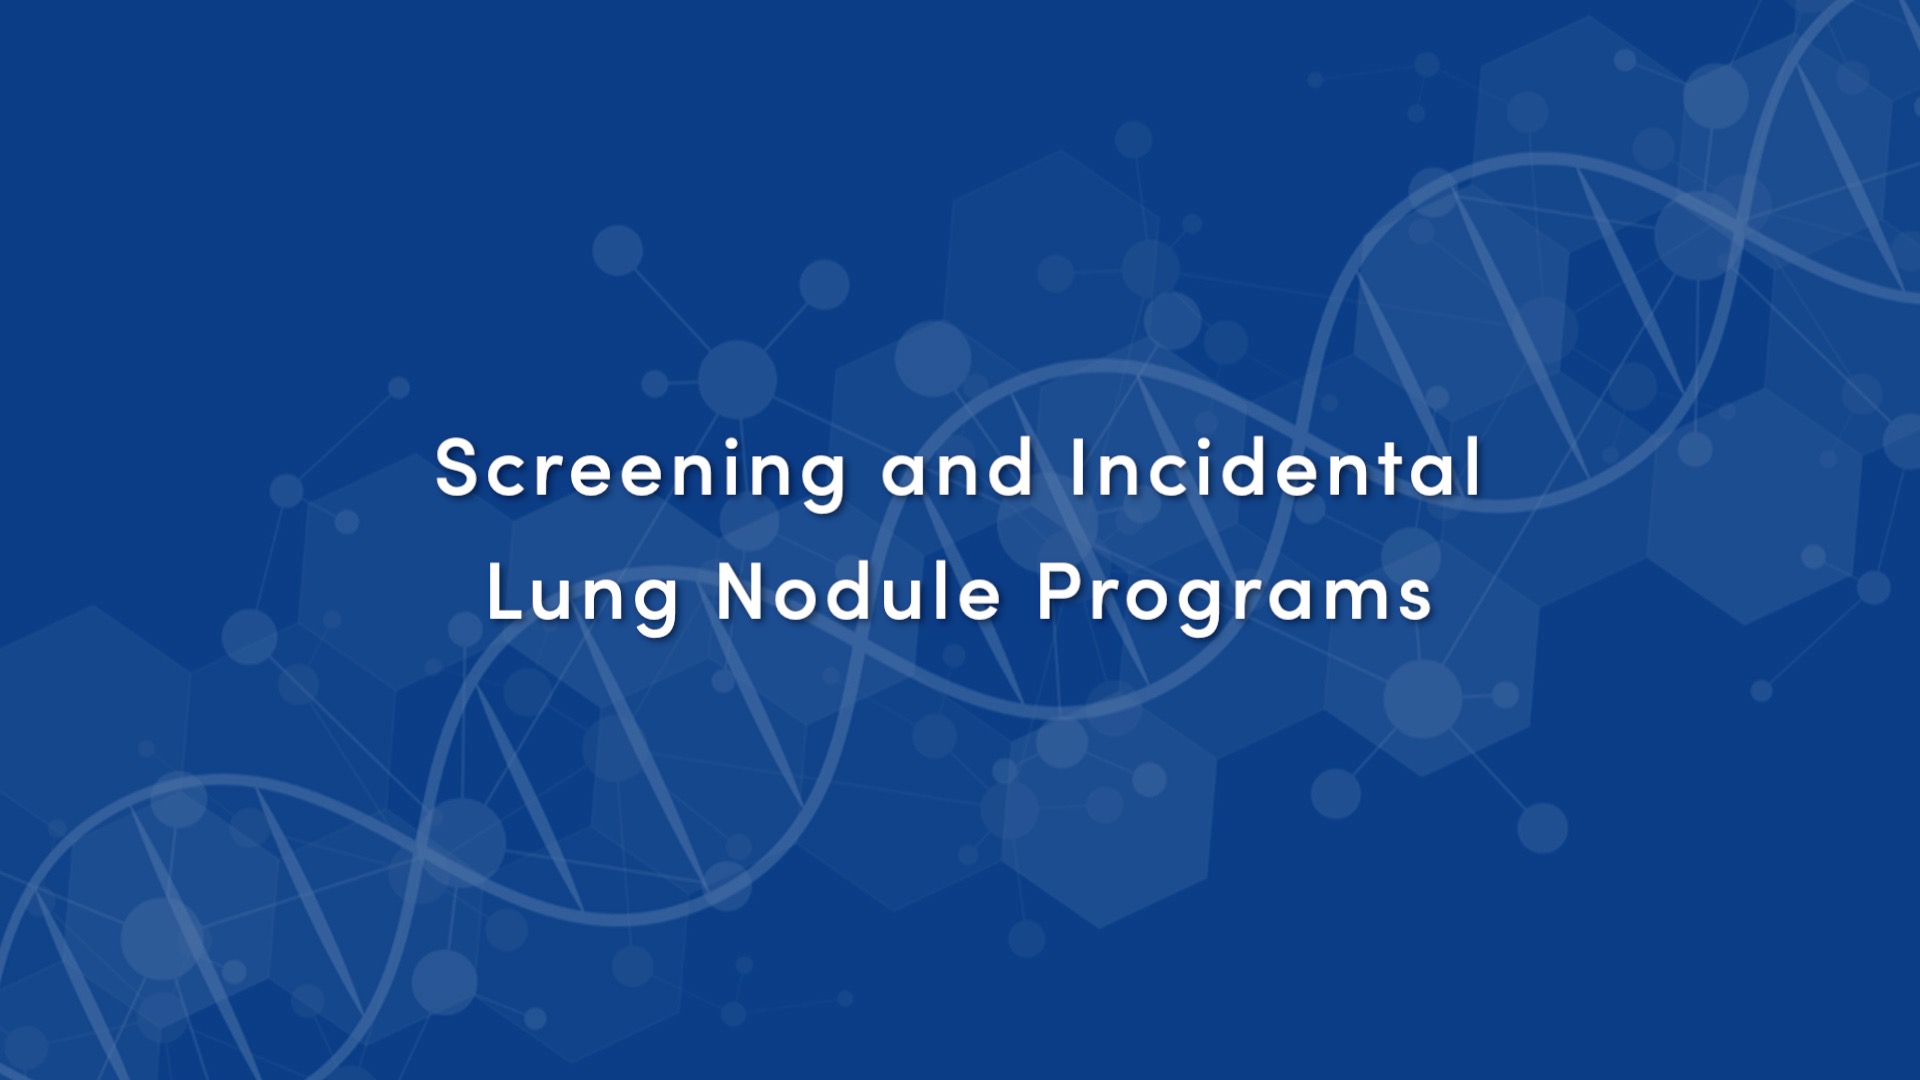 Screening and Incidental Lung Nodule Programs